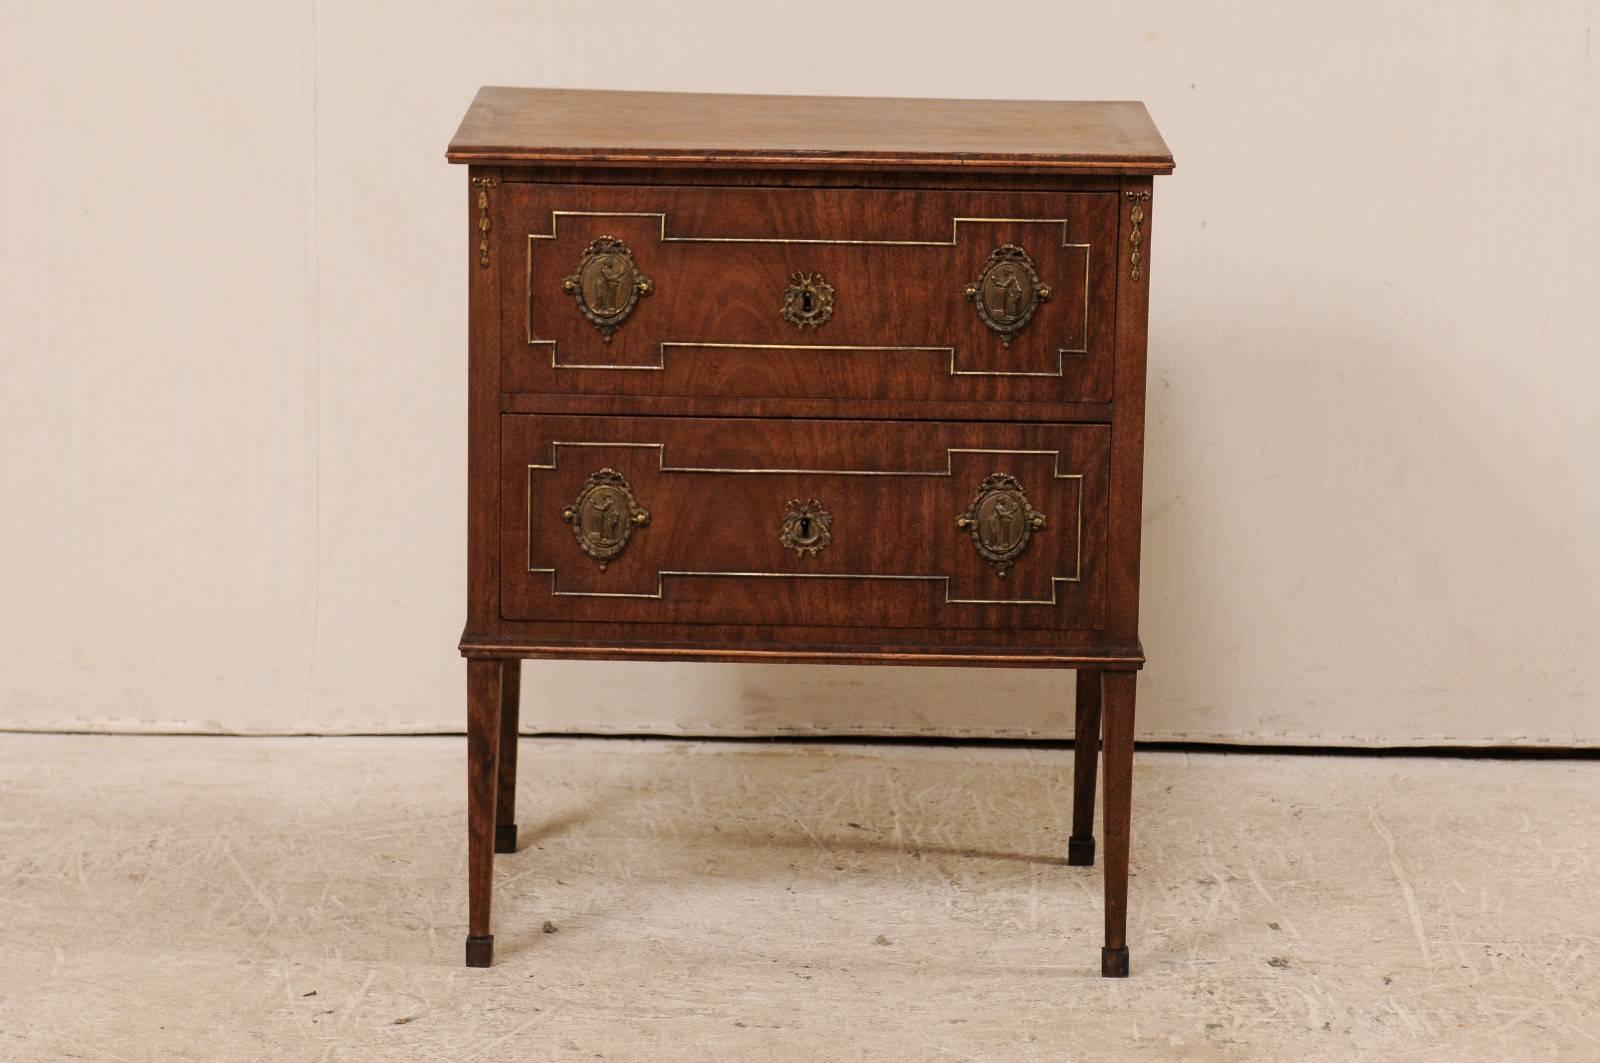 A French mahogany two-drawer chest from the early 20th century. This antique French chest features two dovetailed drawers decorated with exquisite Empire style hardware. The keyholes are hidden behind the ornamental escutcheons in their center. This